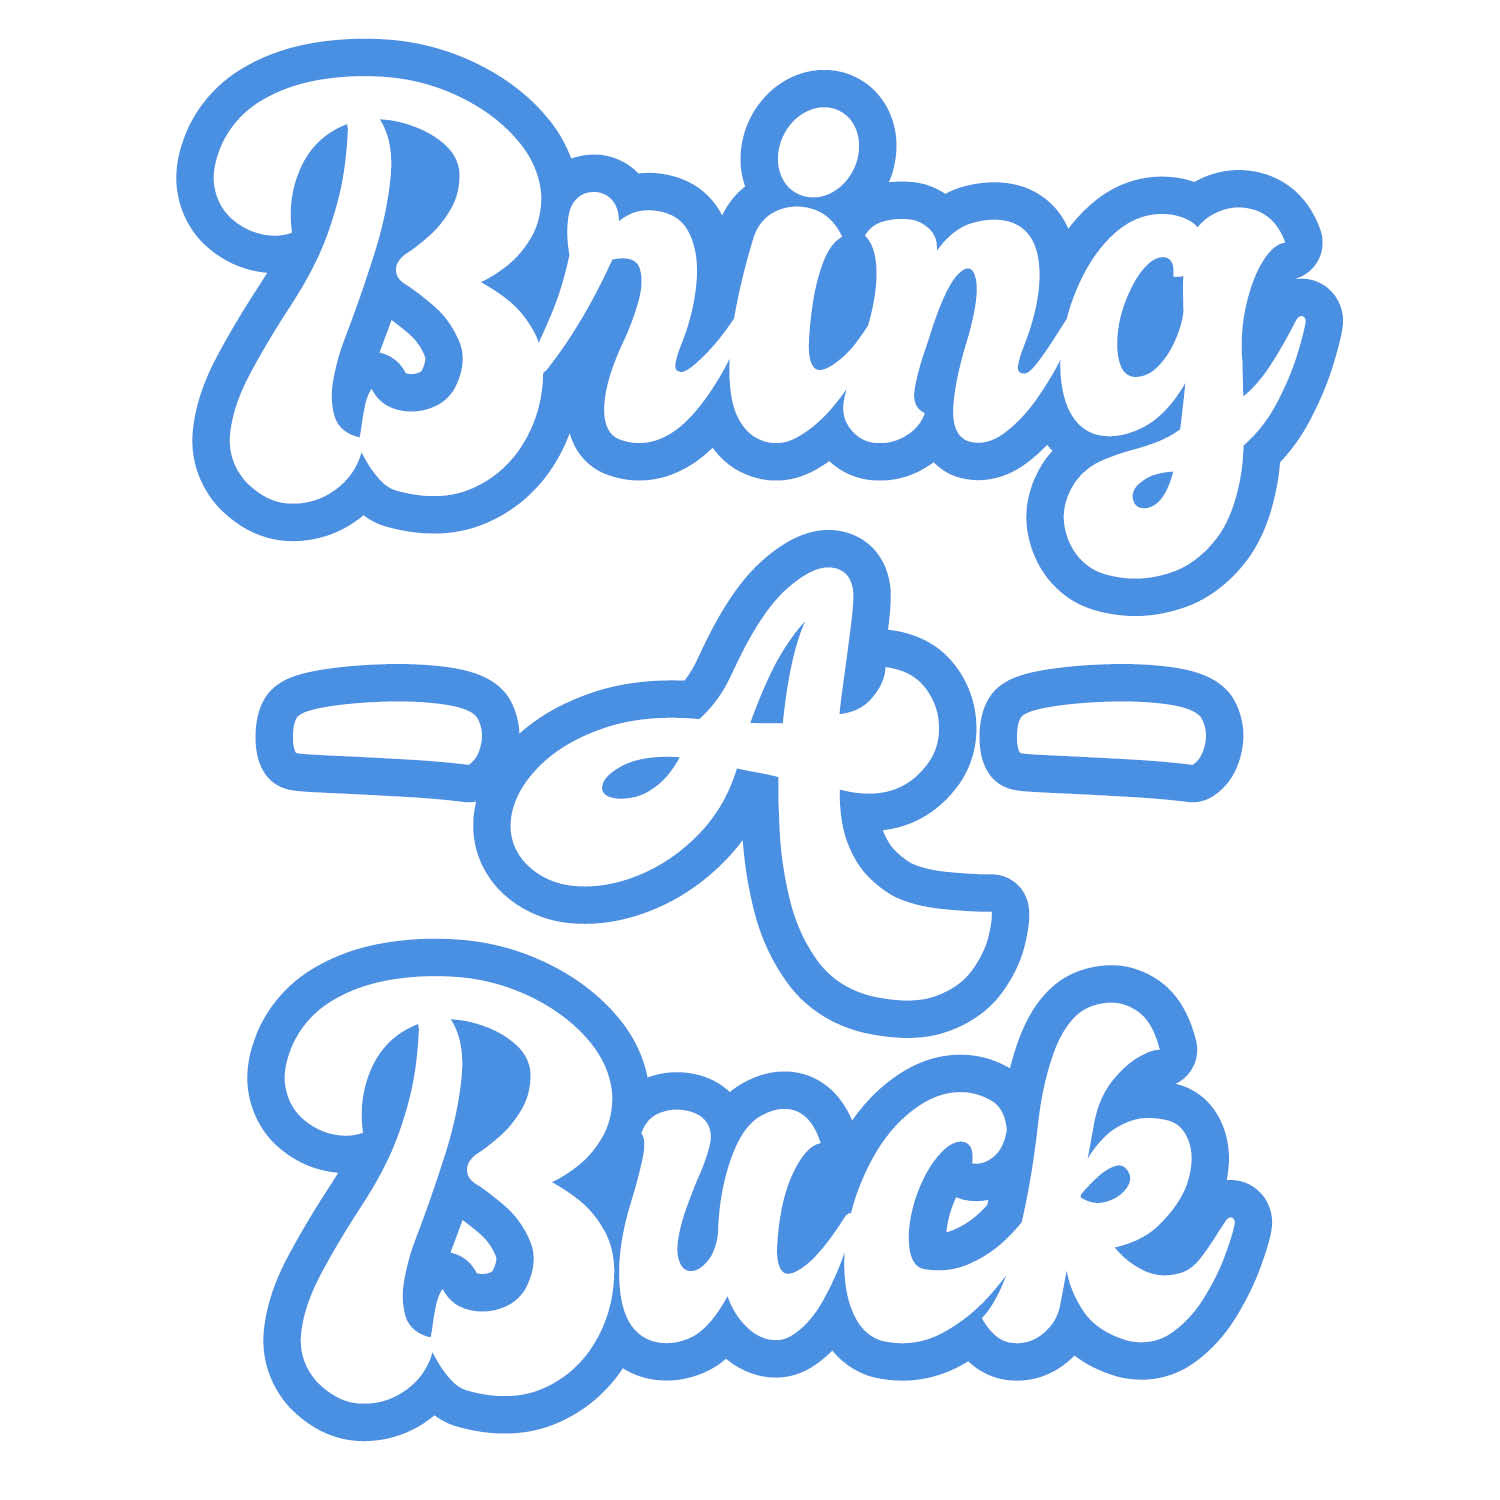 Ben's Bells Donation - Bring-A-Buck (in person)